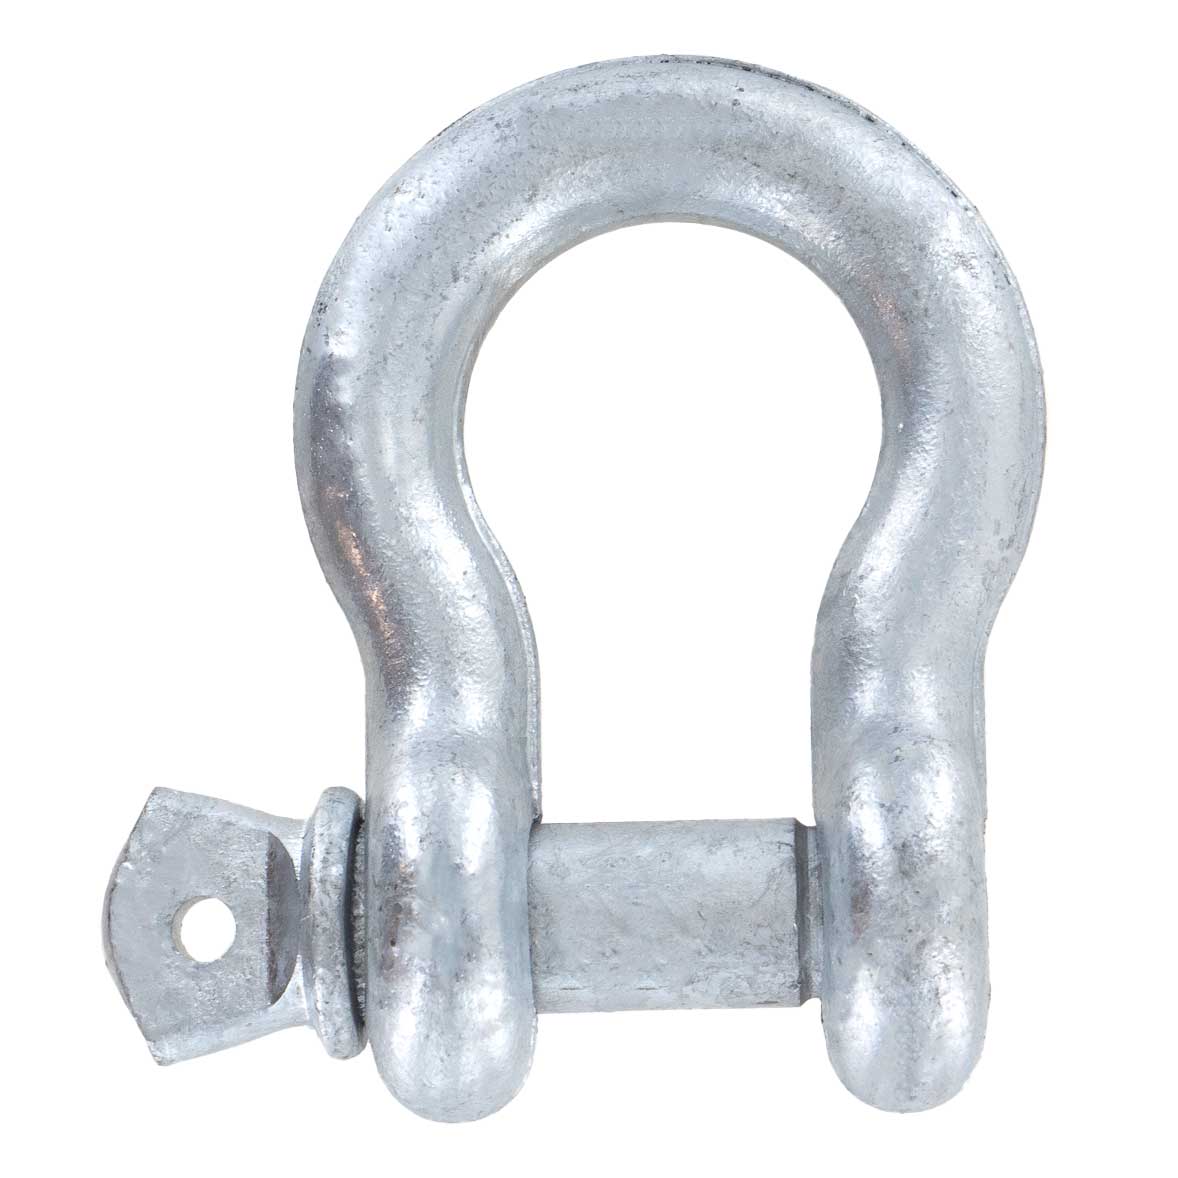 1-1/4" Galvanized Screw Pin Anchor Shackle - 12 Ton rear view